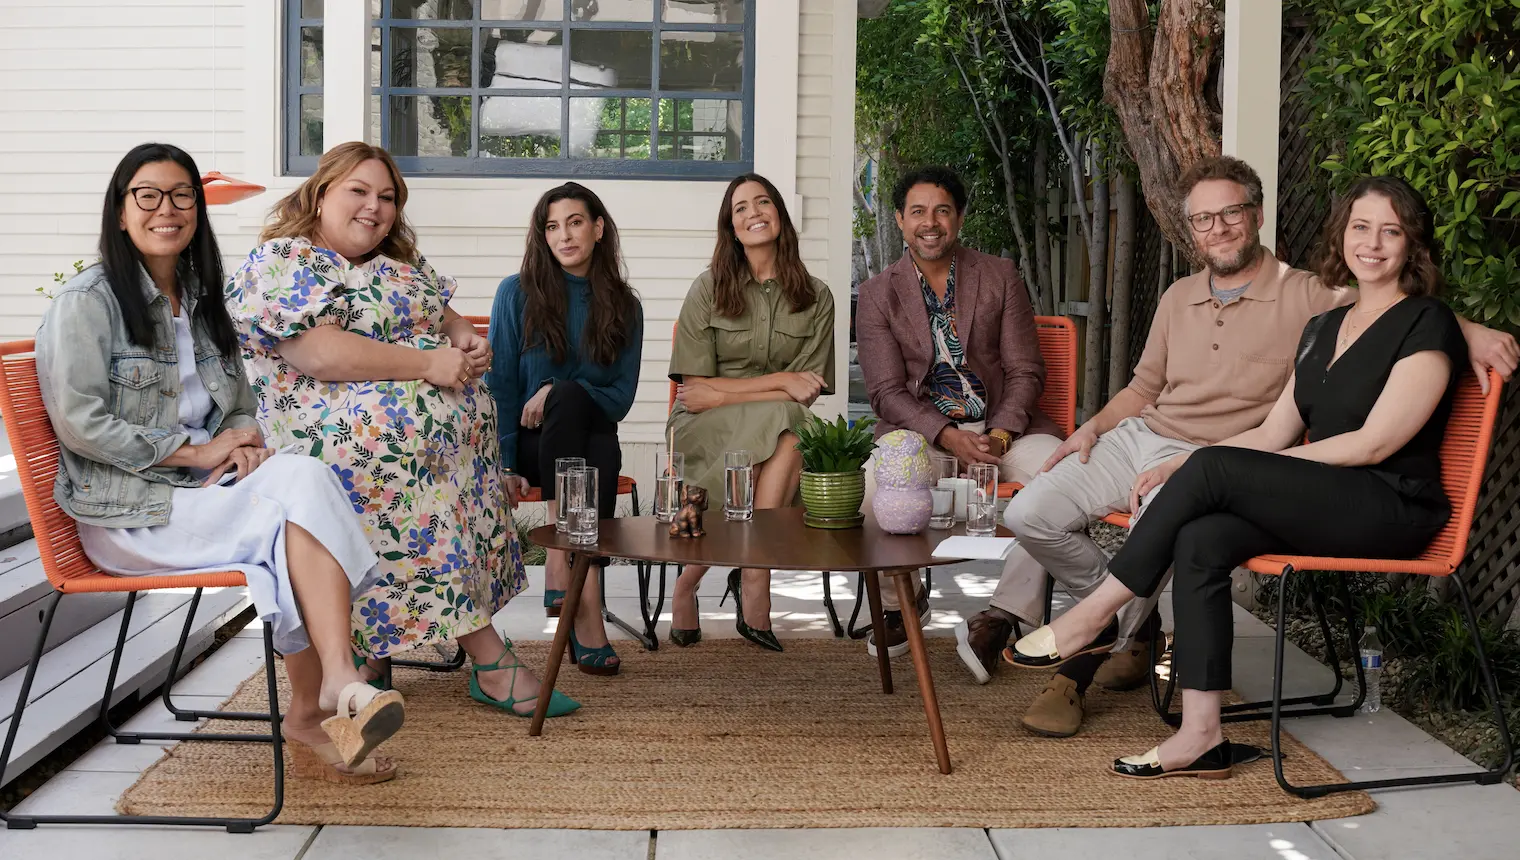 Seven people sitting in a semicircle and smiling at the camera. Among the group are: Seth and Lauren Miller Rogen; cast members of NBC’s “This Is Us” Mandy Moore, Chrissty Metz and Jon Huertas; series executive producer KJ Steinberg; and Caring Across Generations’ Executive Director Ai-jen Poo. Photo credit: Maya Minhas / Caring Across Gen